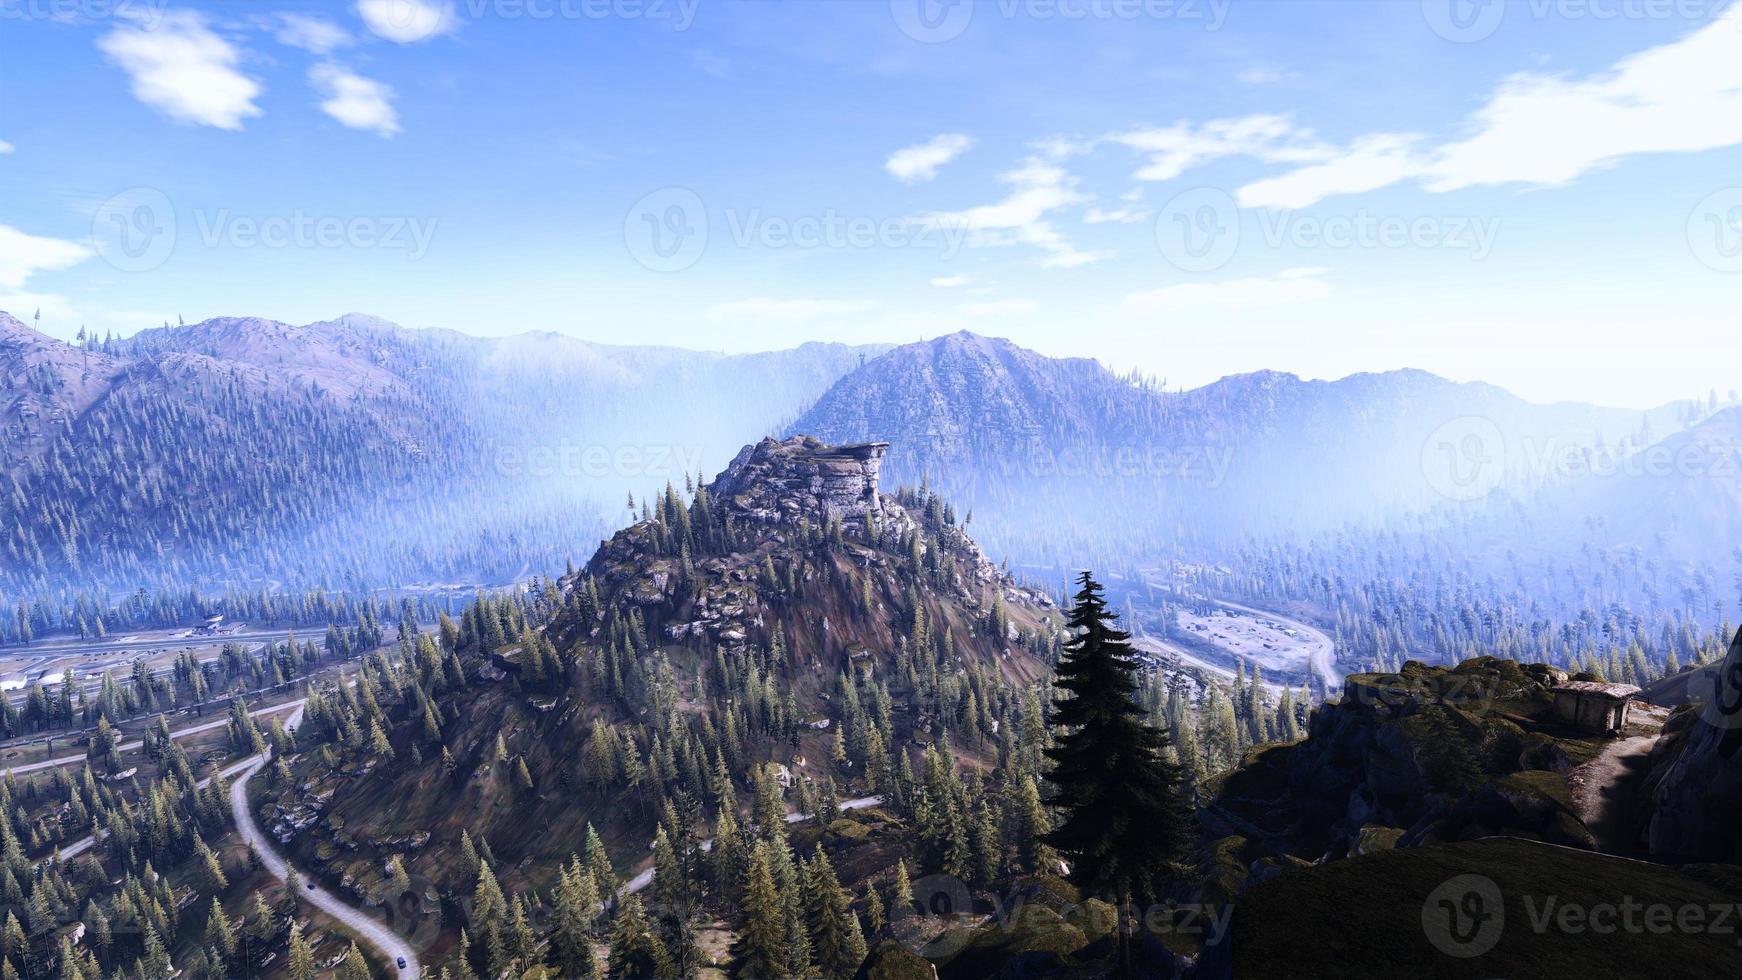 Natural landscape, mountains, forests, aerial shot, realistic 3D rendering photo